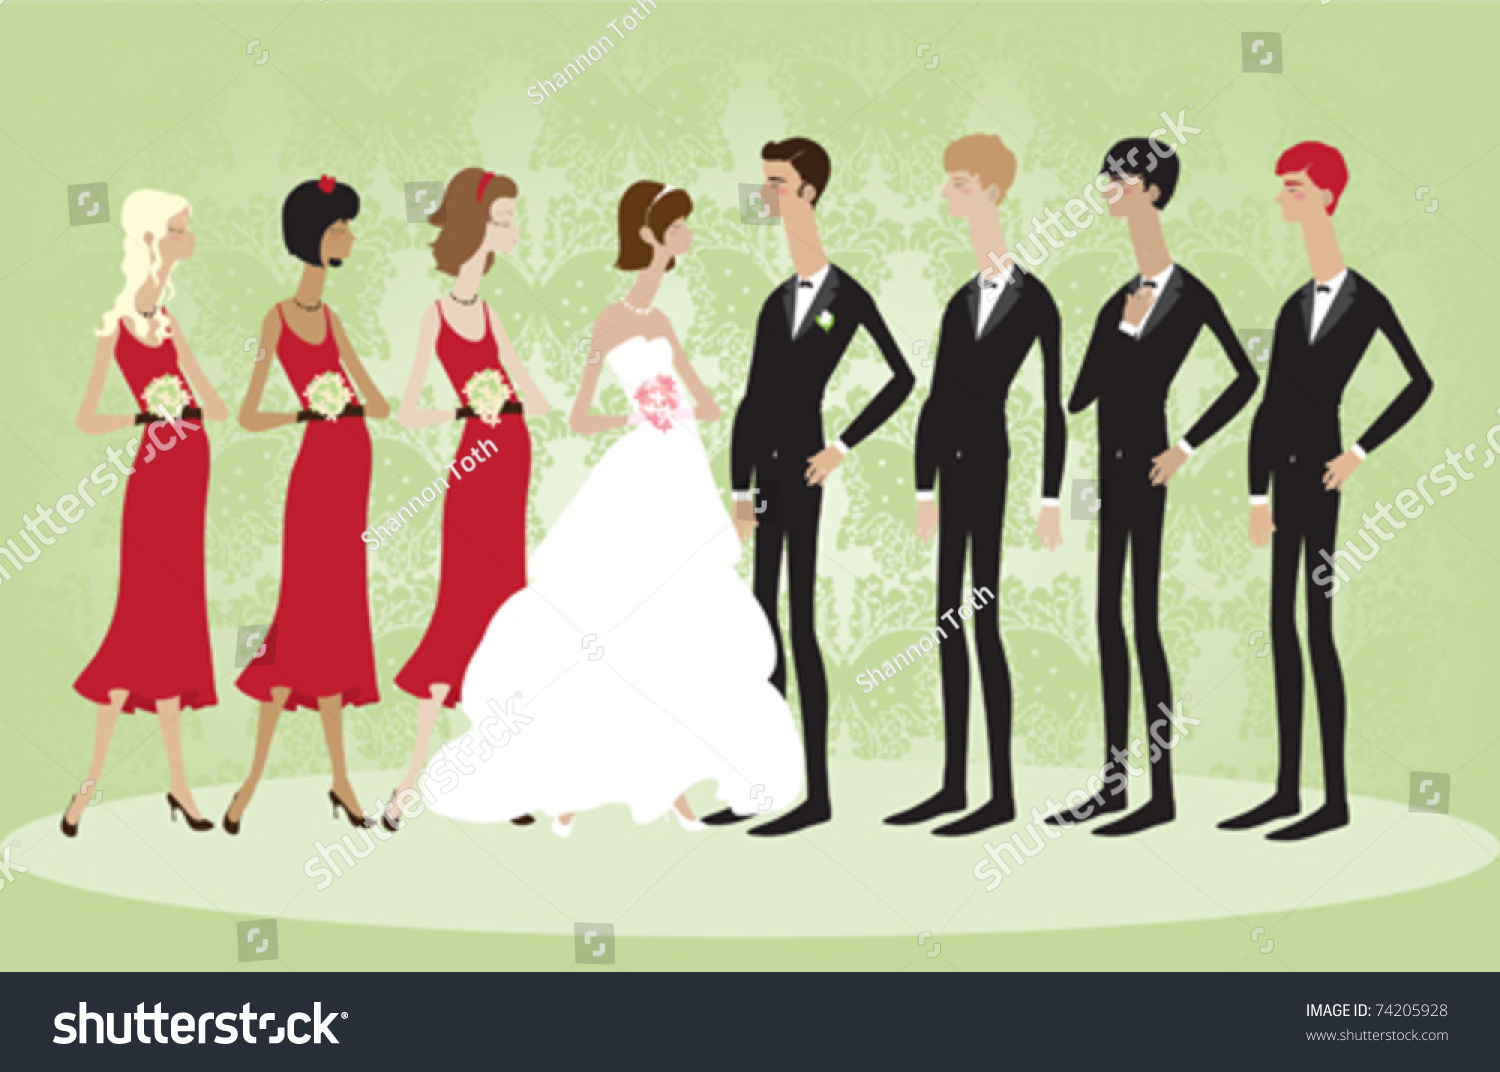 free wedding party clipart - photo #23